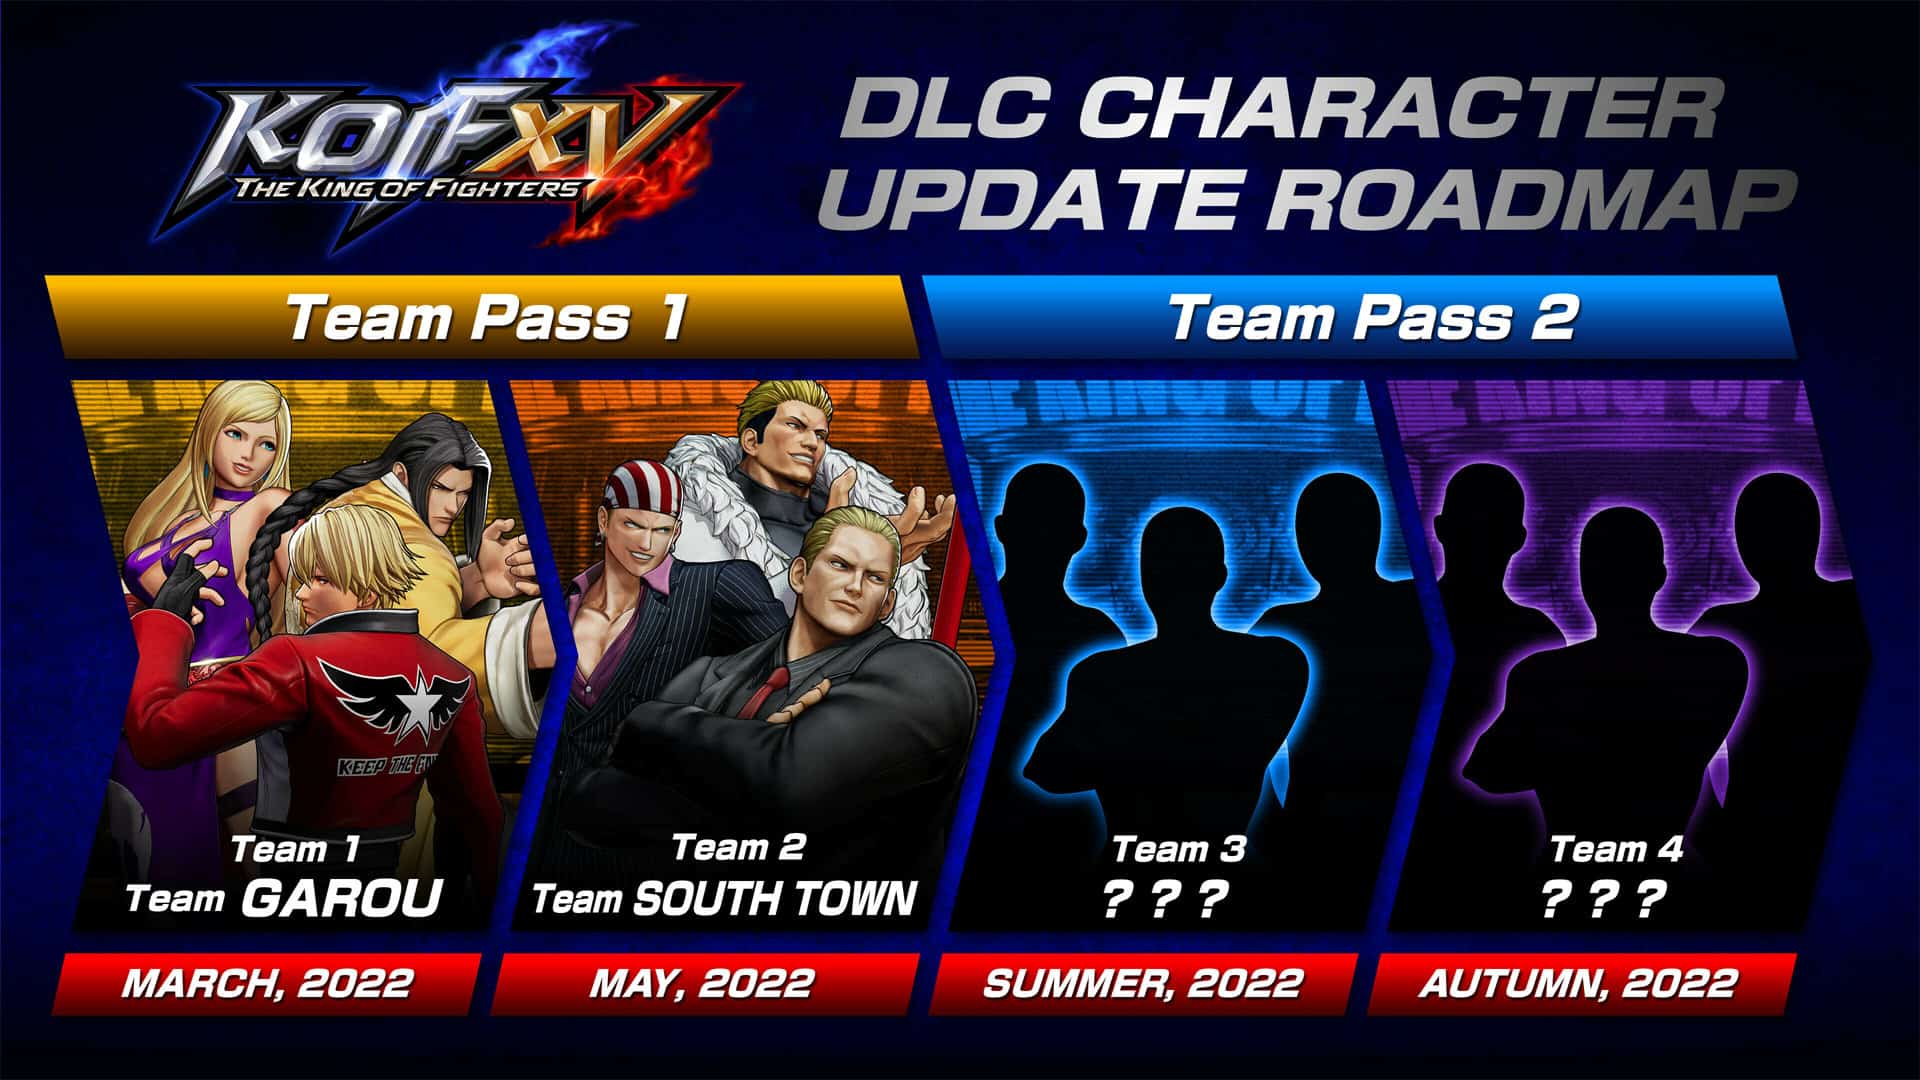 The King of Fighters XV DLC Roadmap